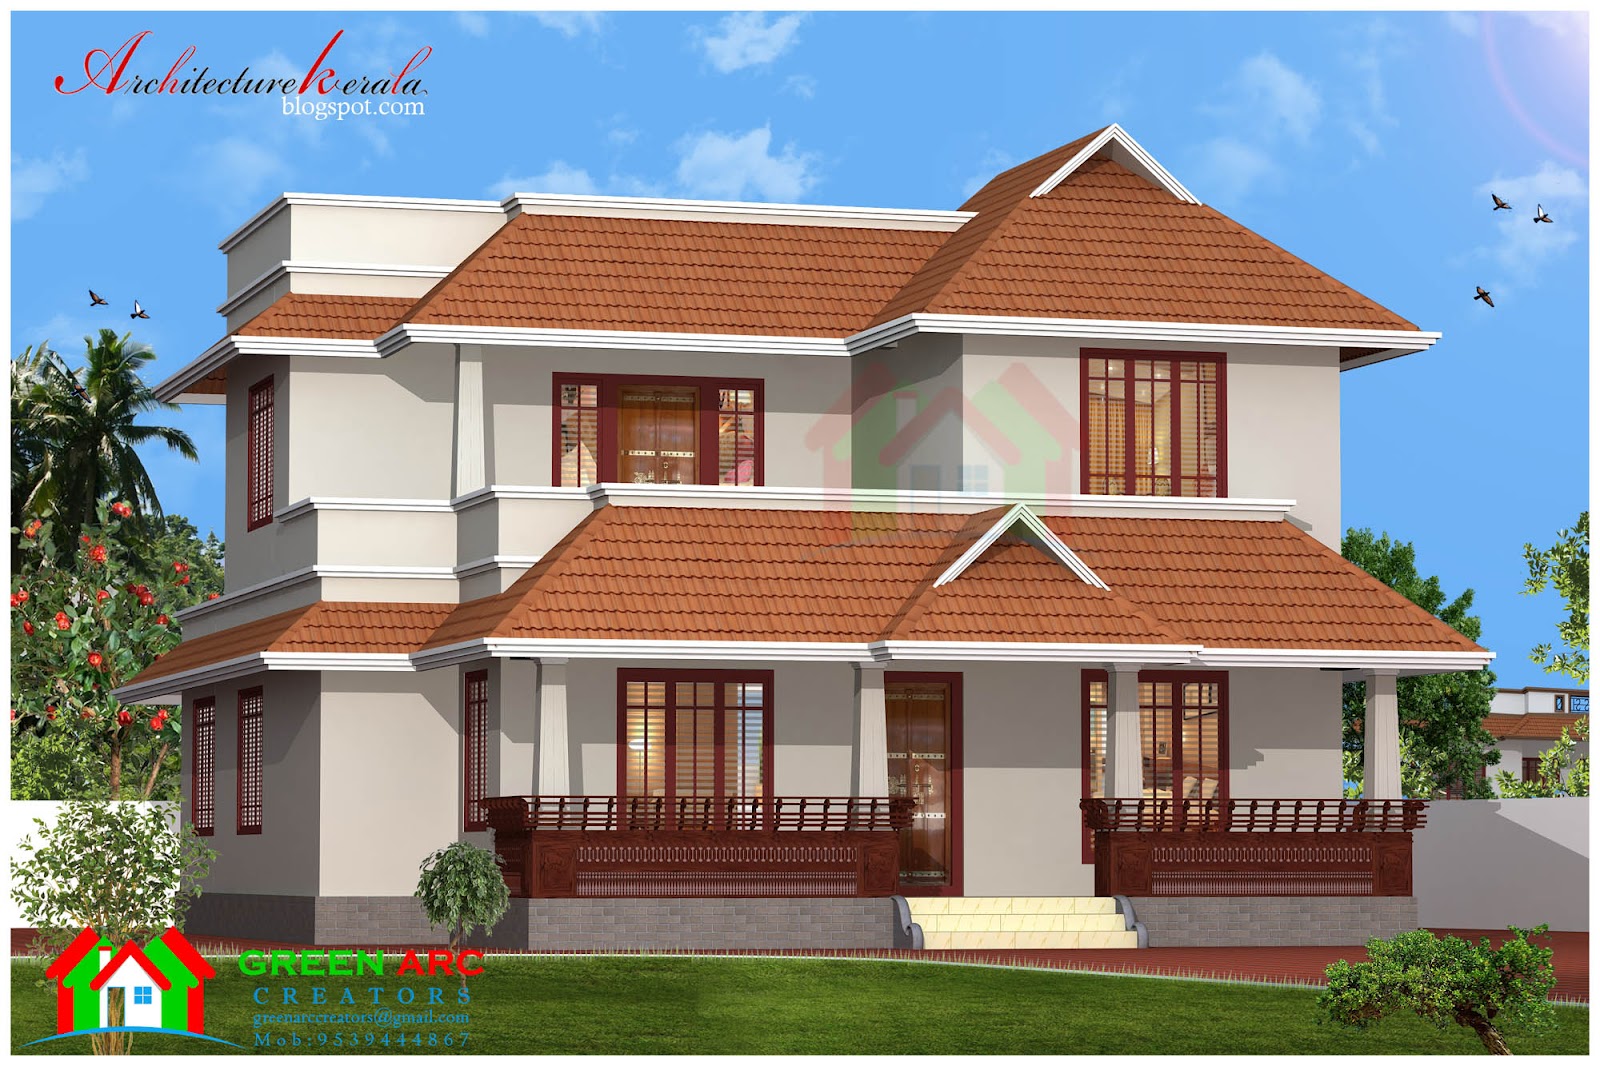 Low Cost Single Floor Home 1050 Sq Ft Kerala Home Design And Floor Plans 8000 Houses